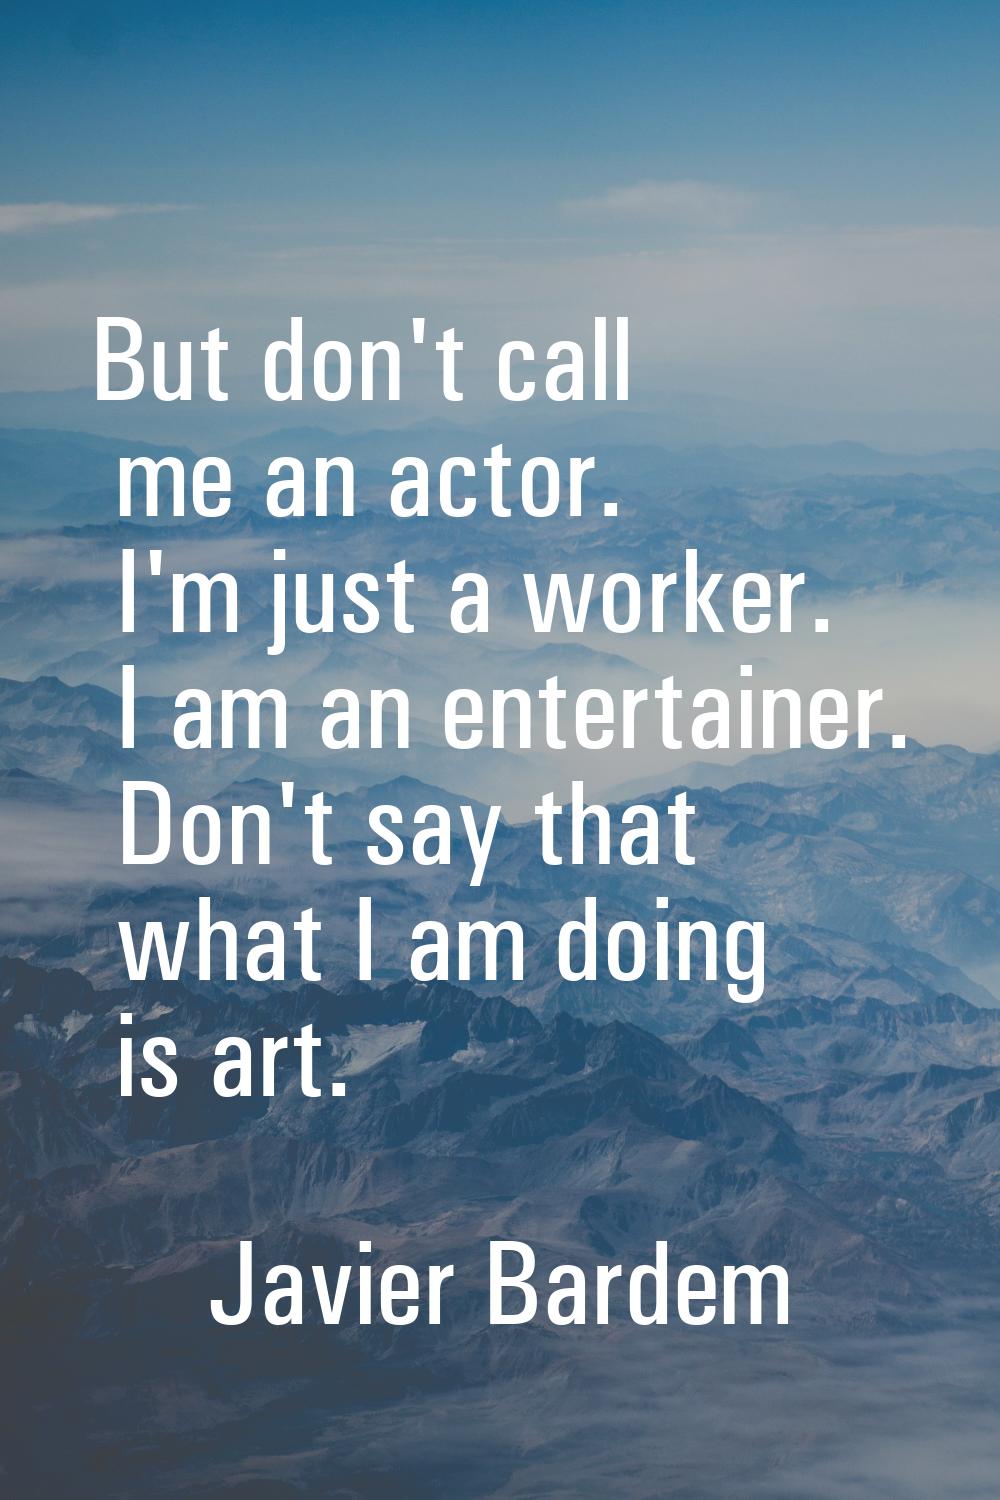 But don't call me an actor. I'm just a worker. I am an entertainer. Don't say that what I am doing 